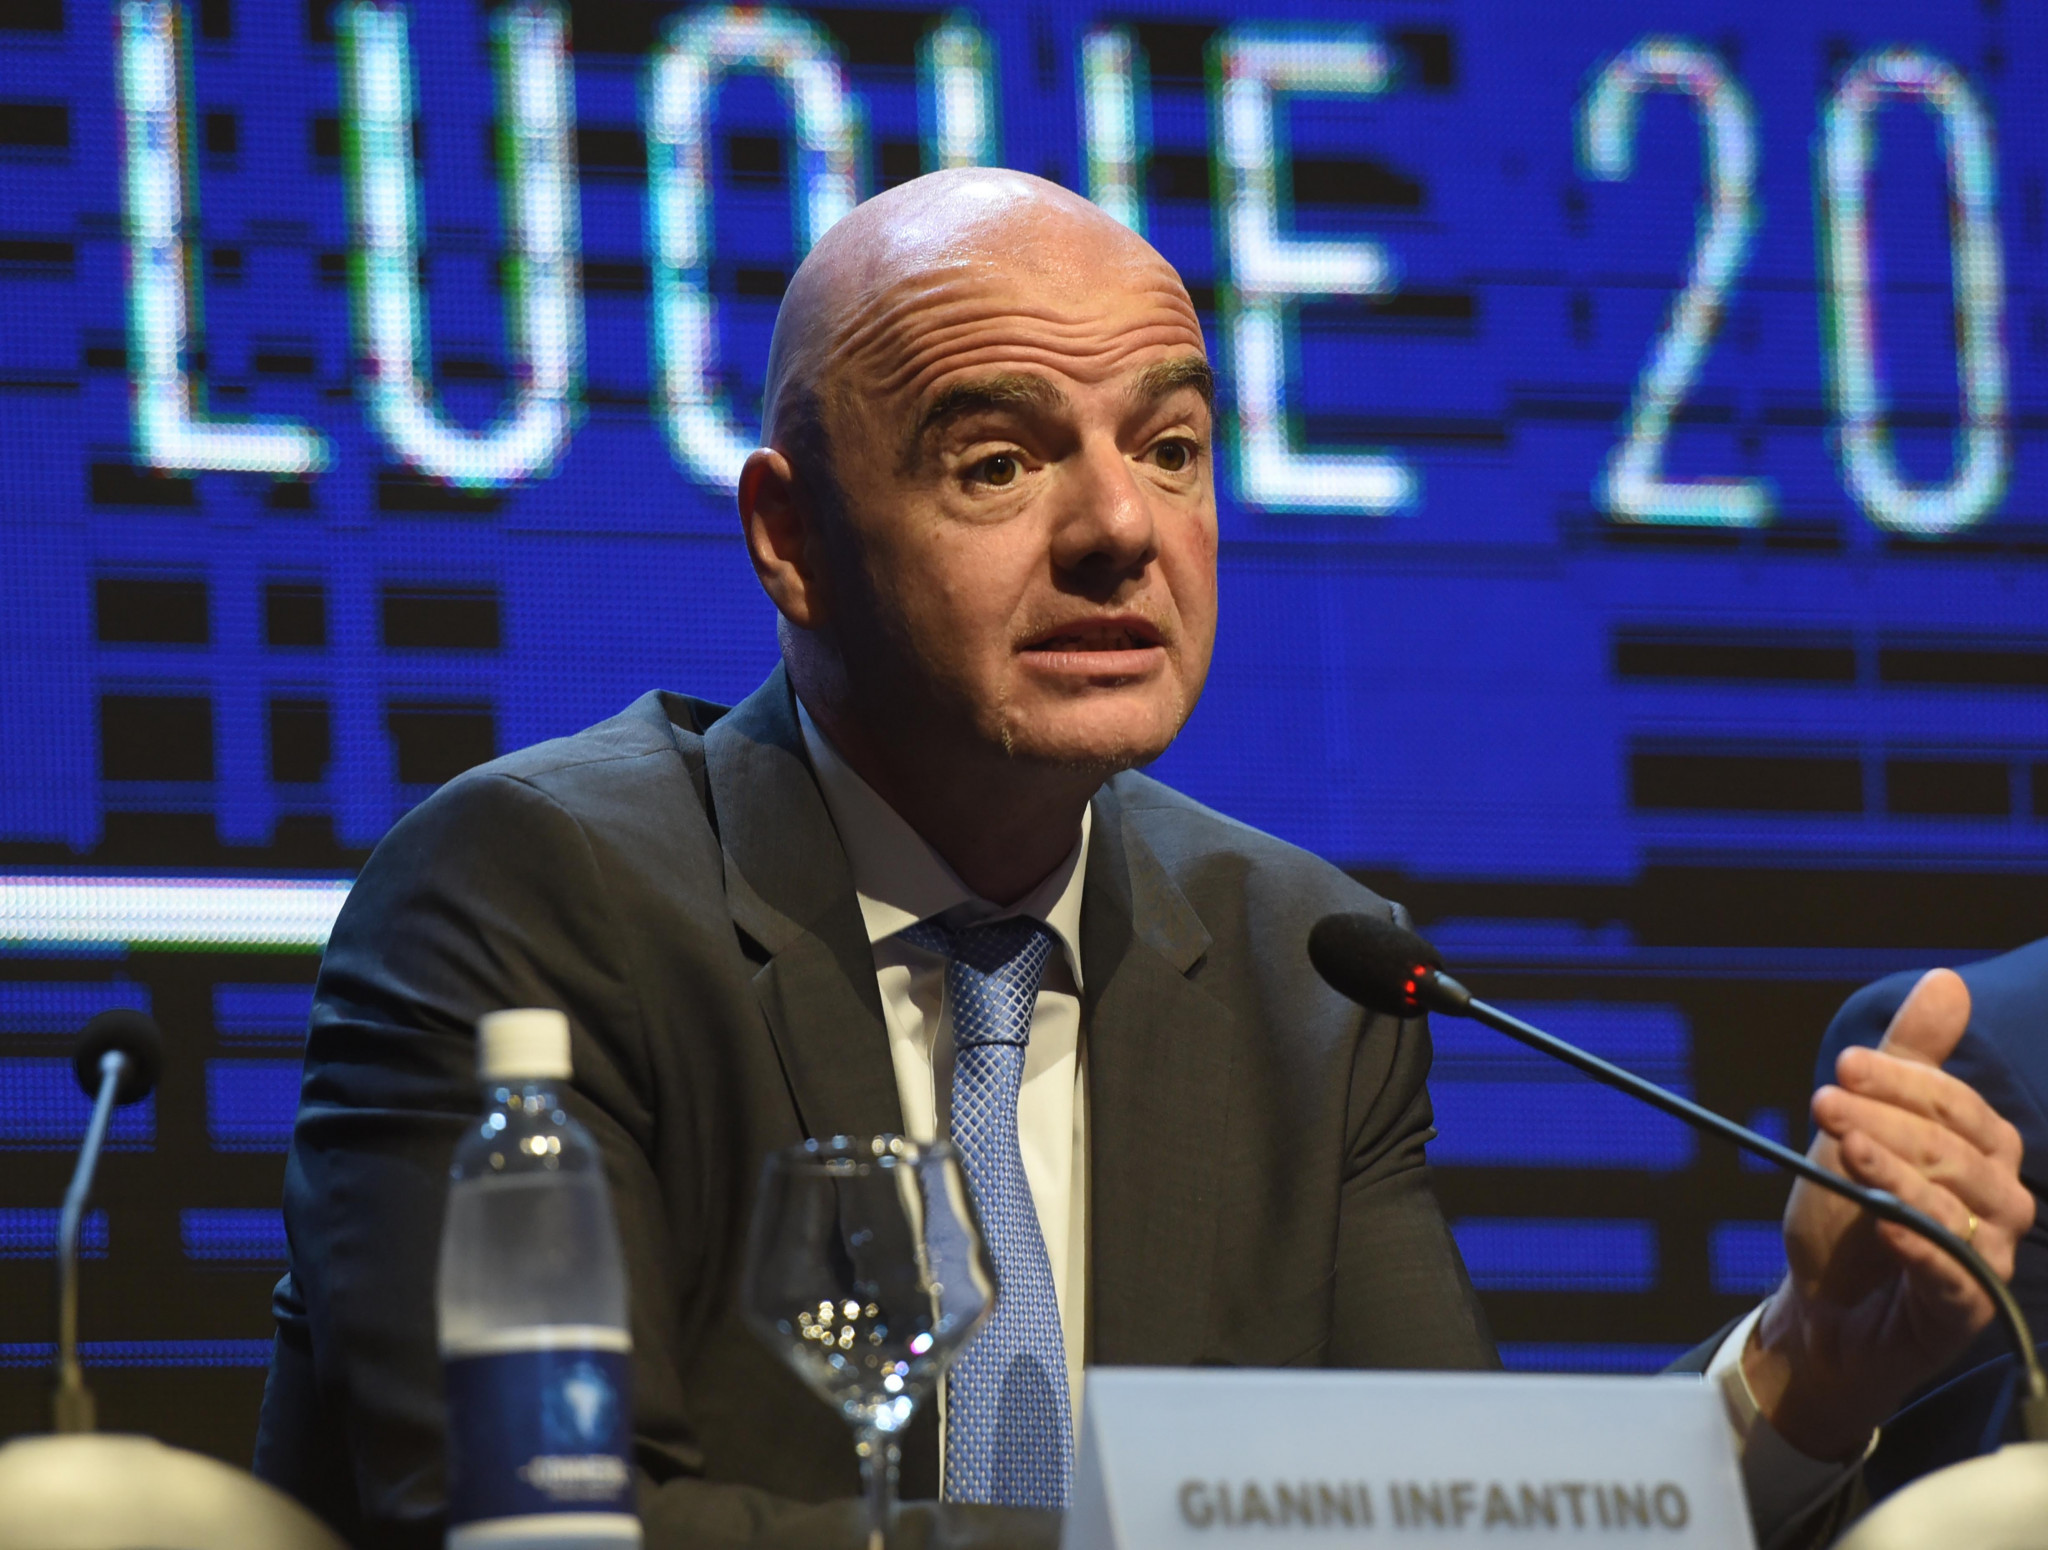 Gianni Infantino has cast doubt on the 2022 World Cup growing to 48 teams ©Getty Images